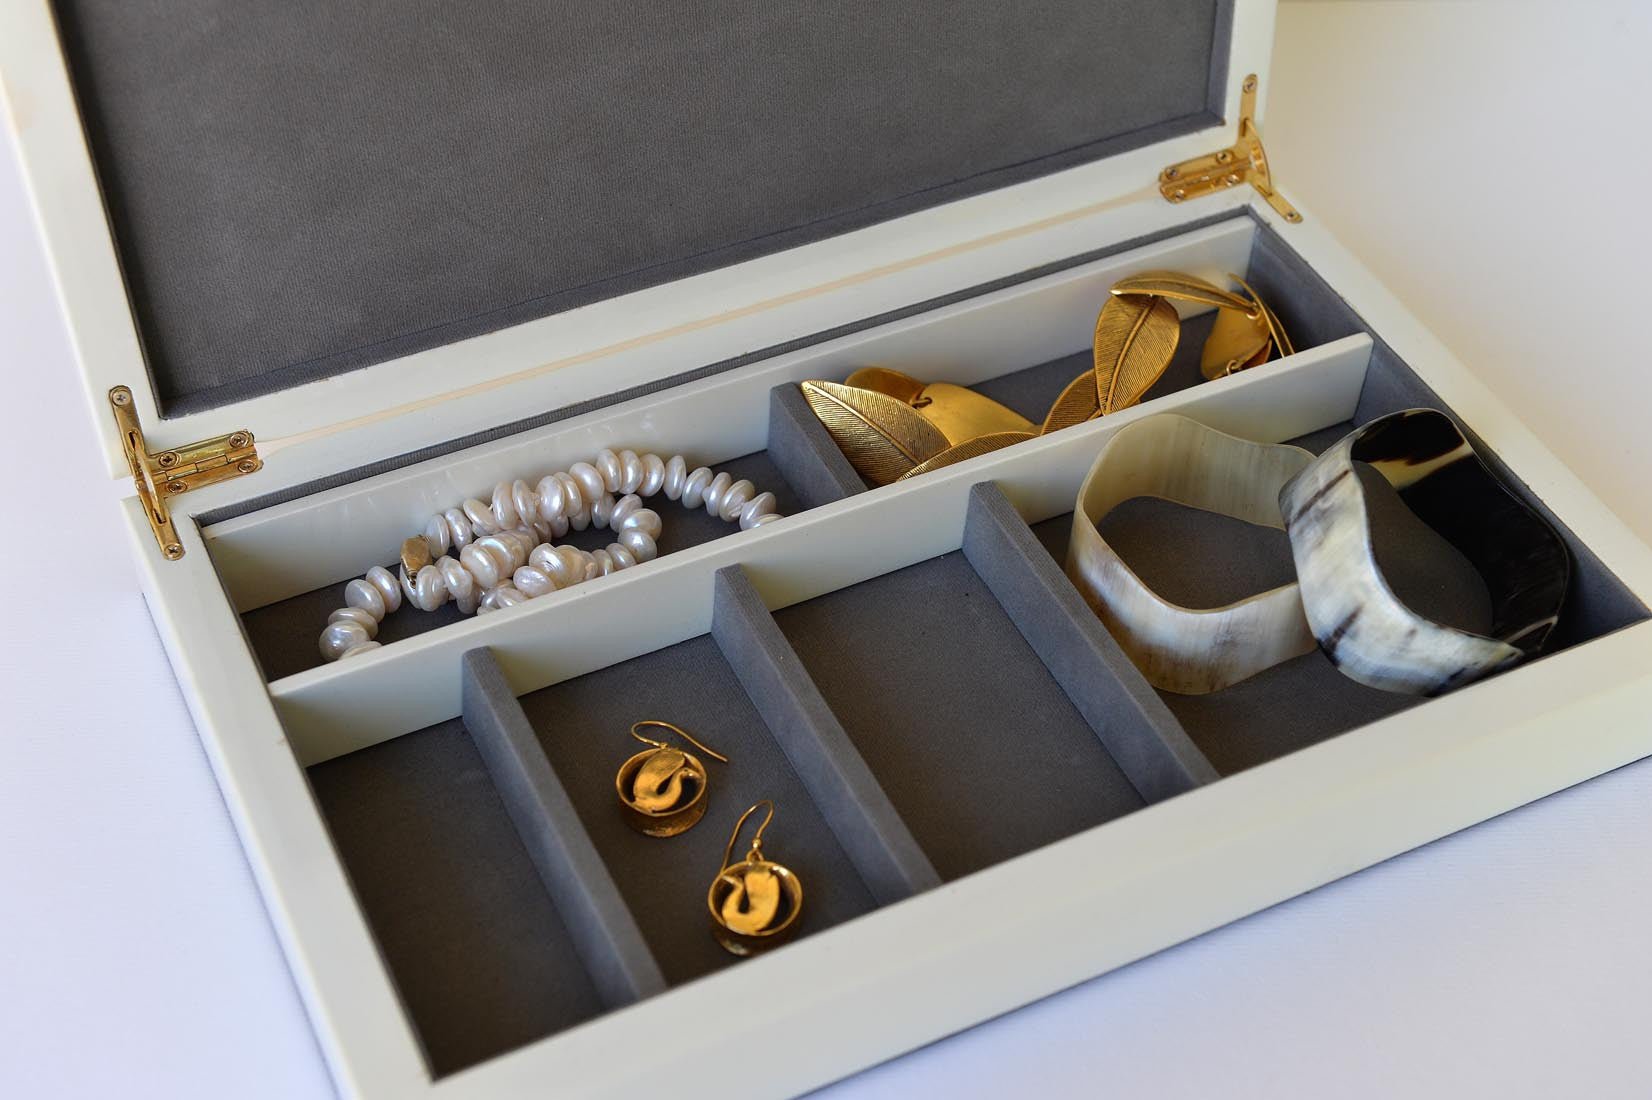 Horn and lacquer wooden jewellery box - Natalia Willmott